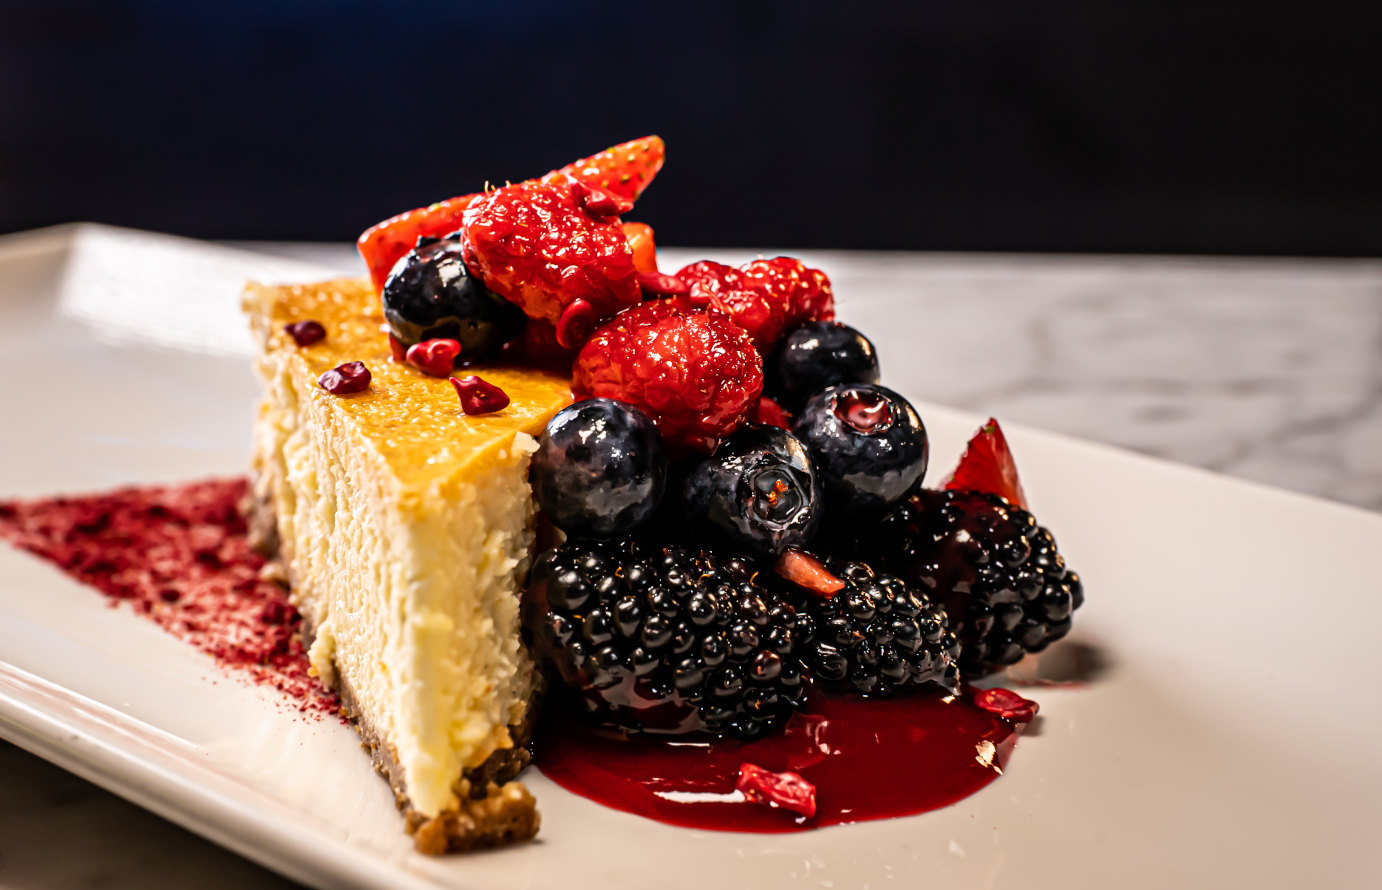 Piece of cake with various berries